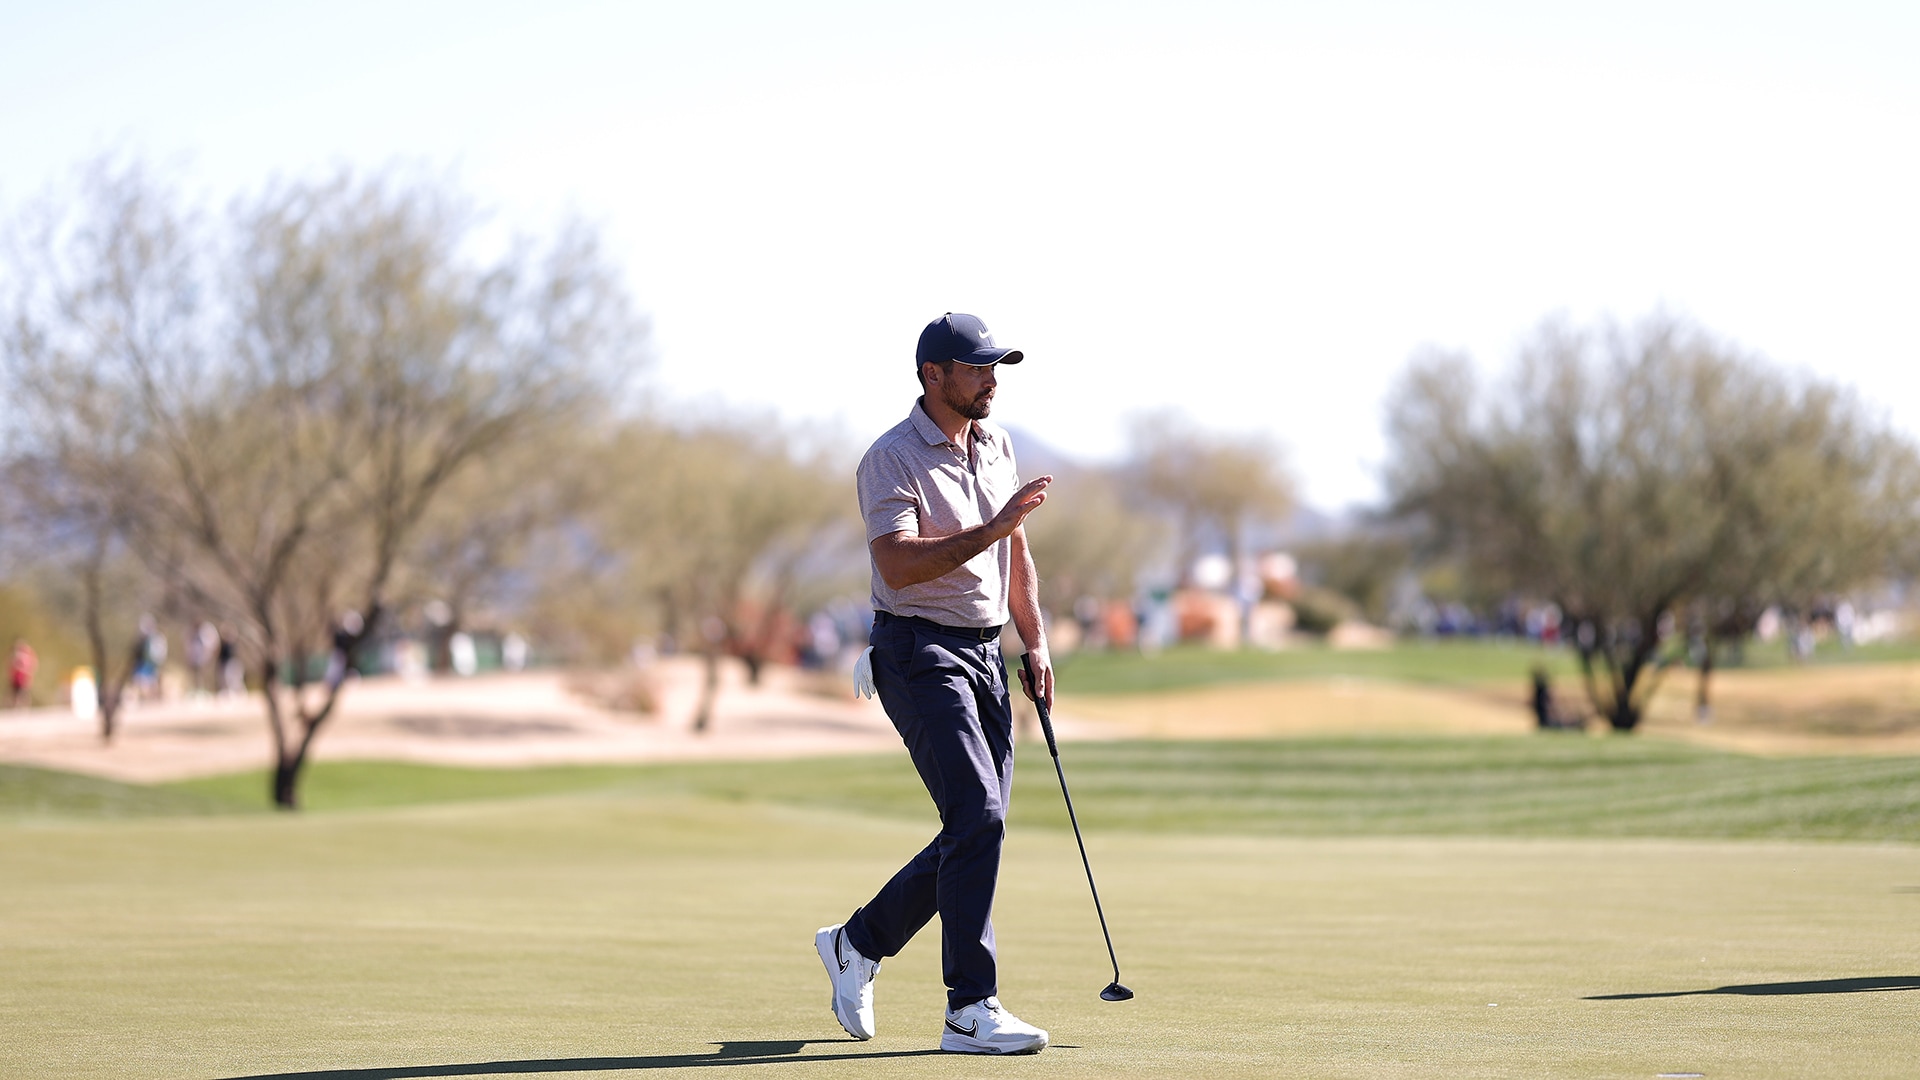 No sleep ’til… As Jason Day finds way back, he longs for restless nights